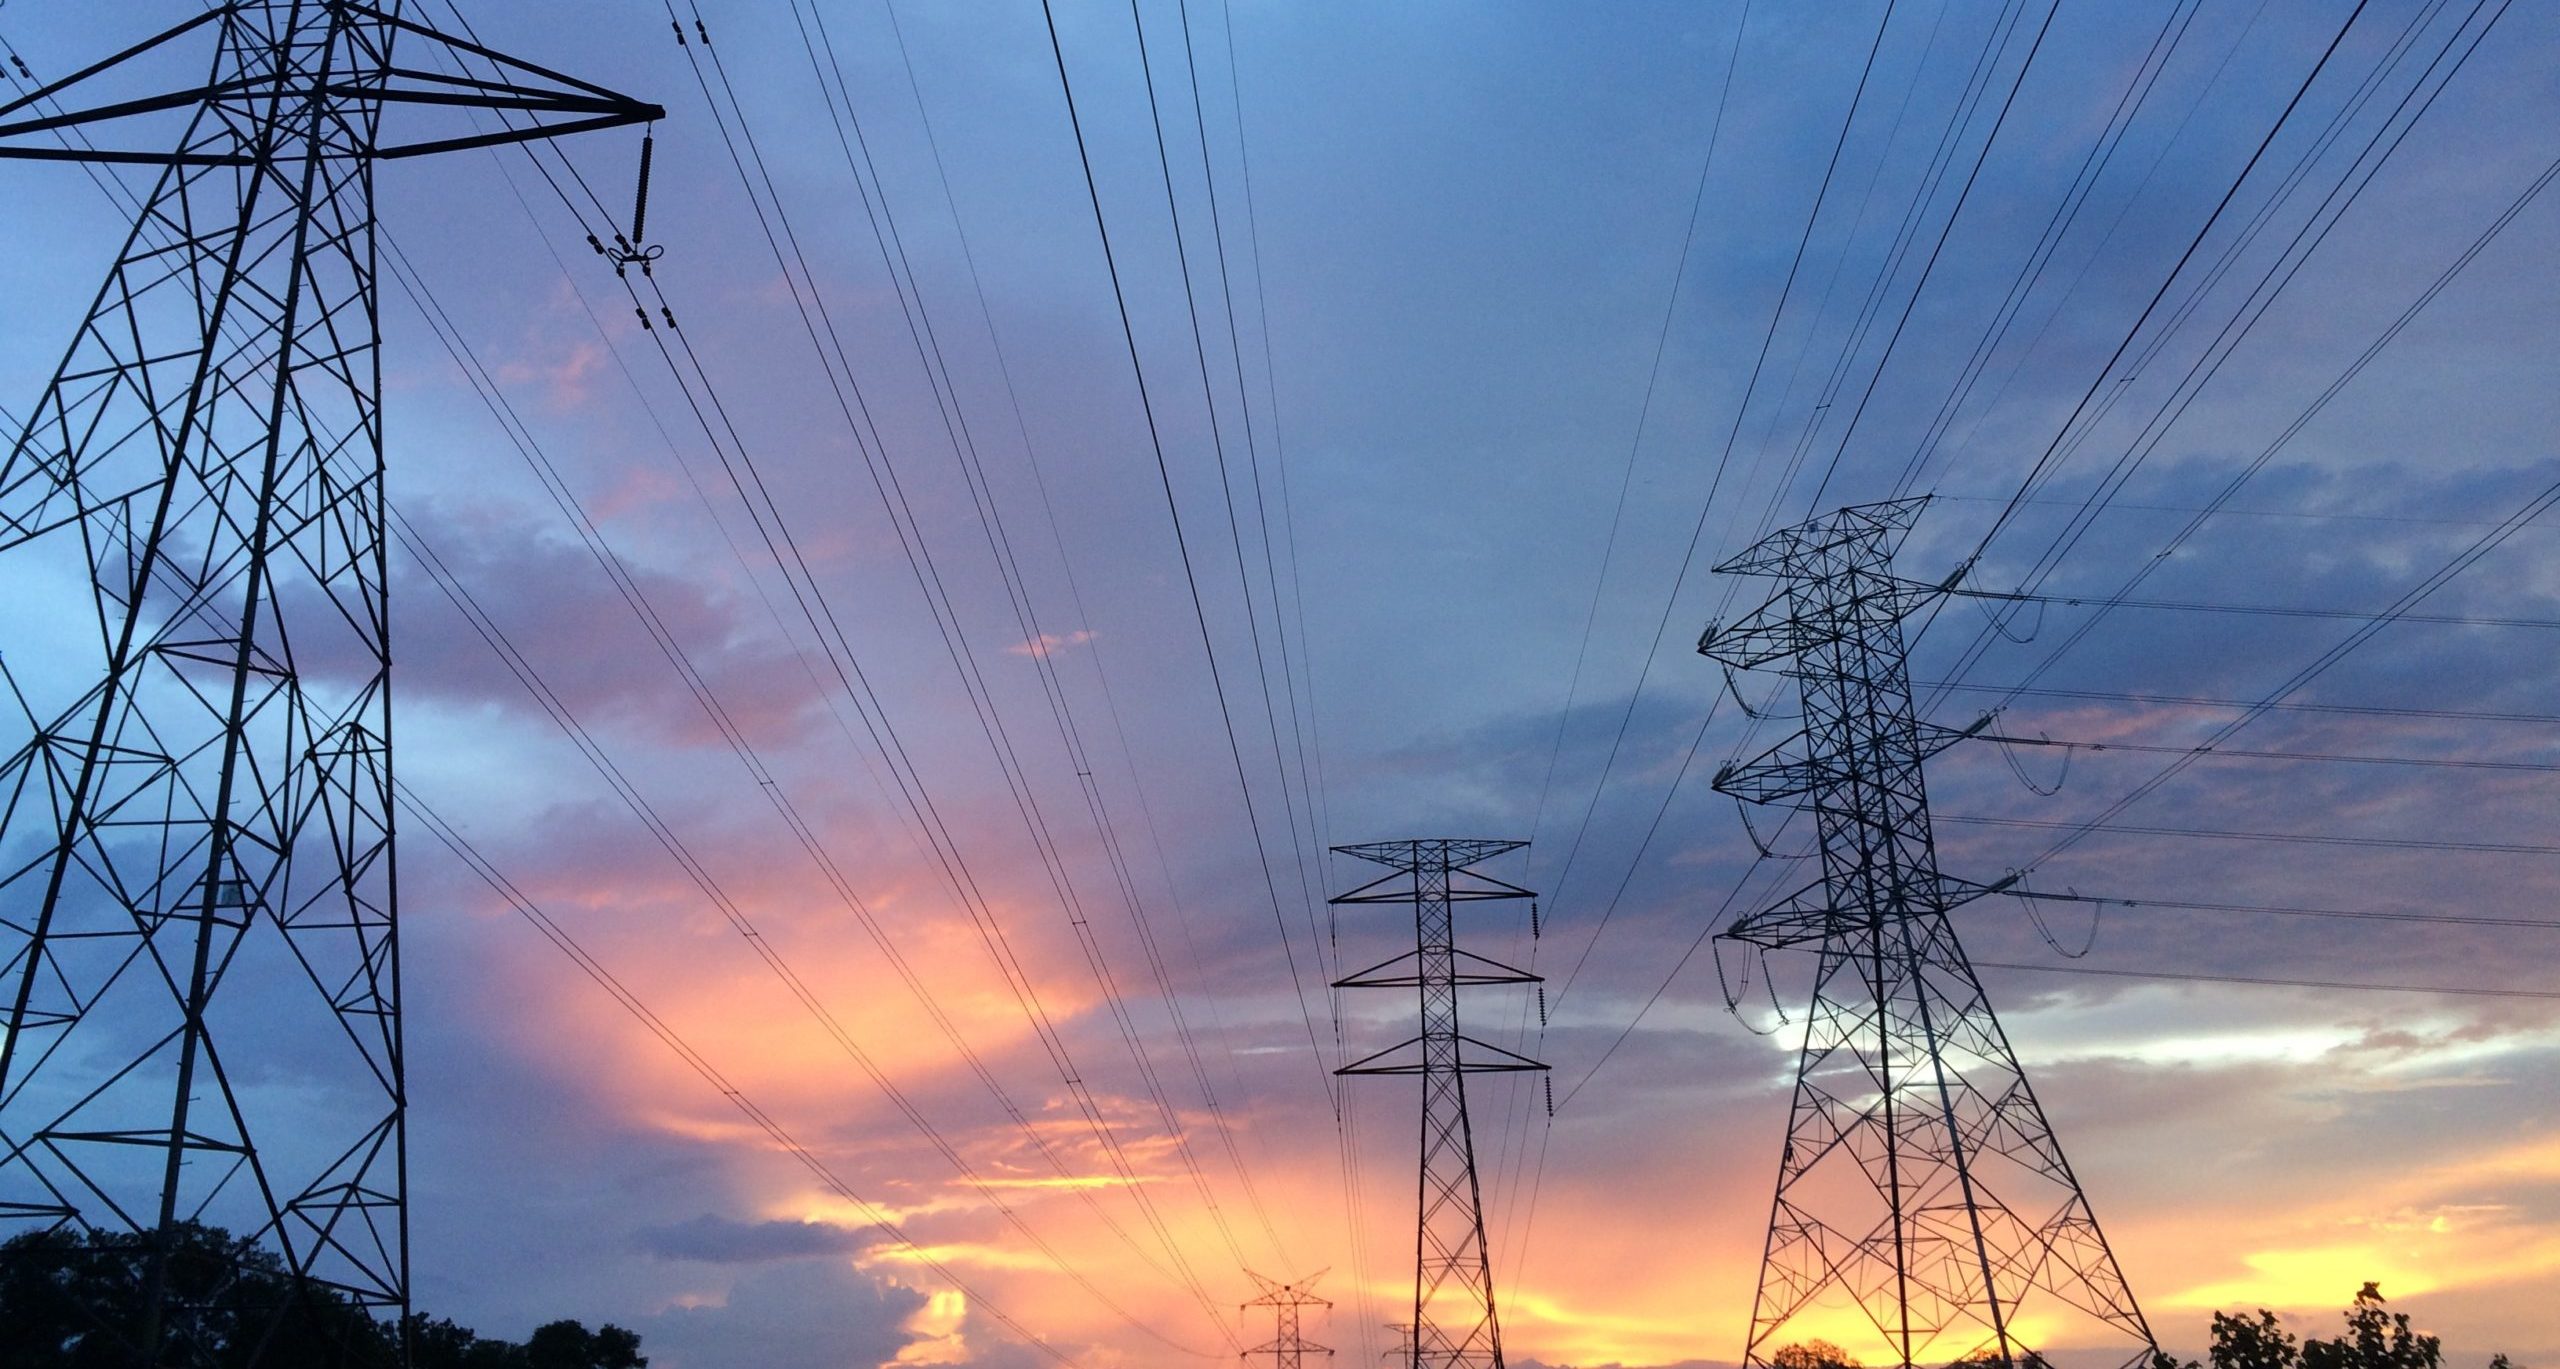 Electricity pylons in front of a sunset sky